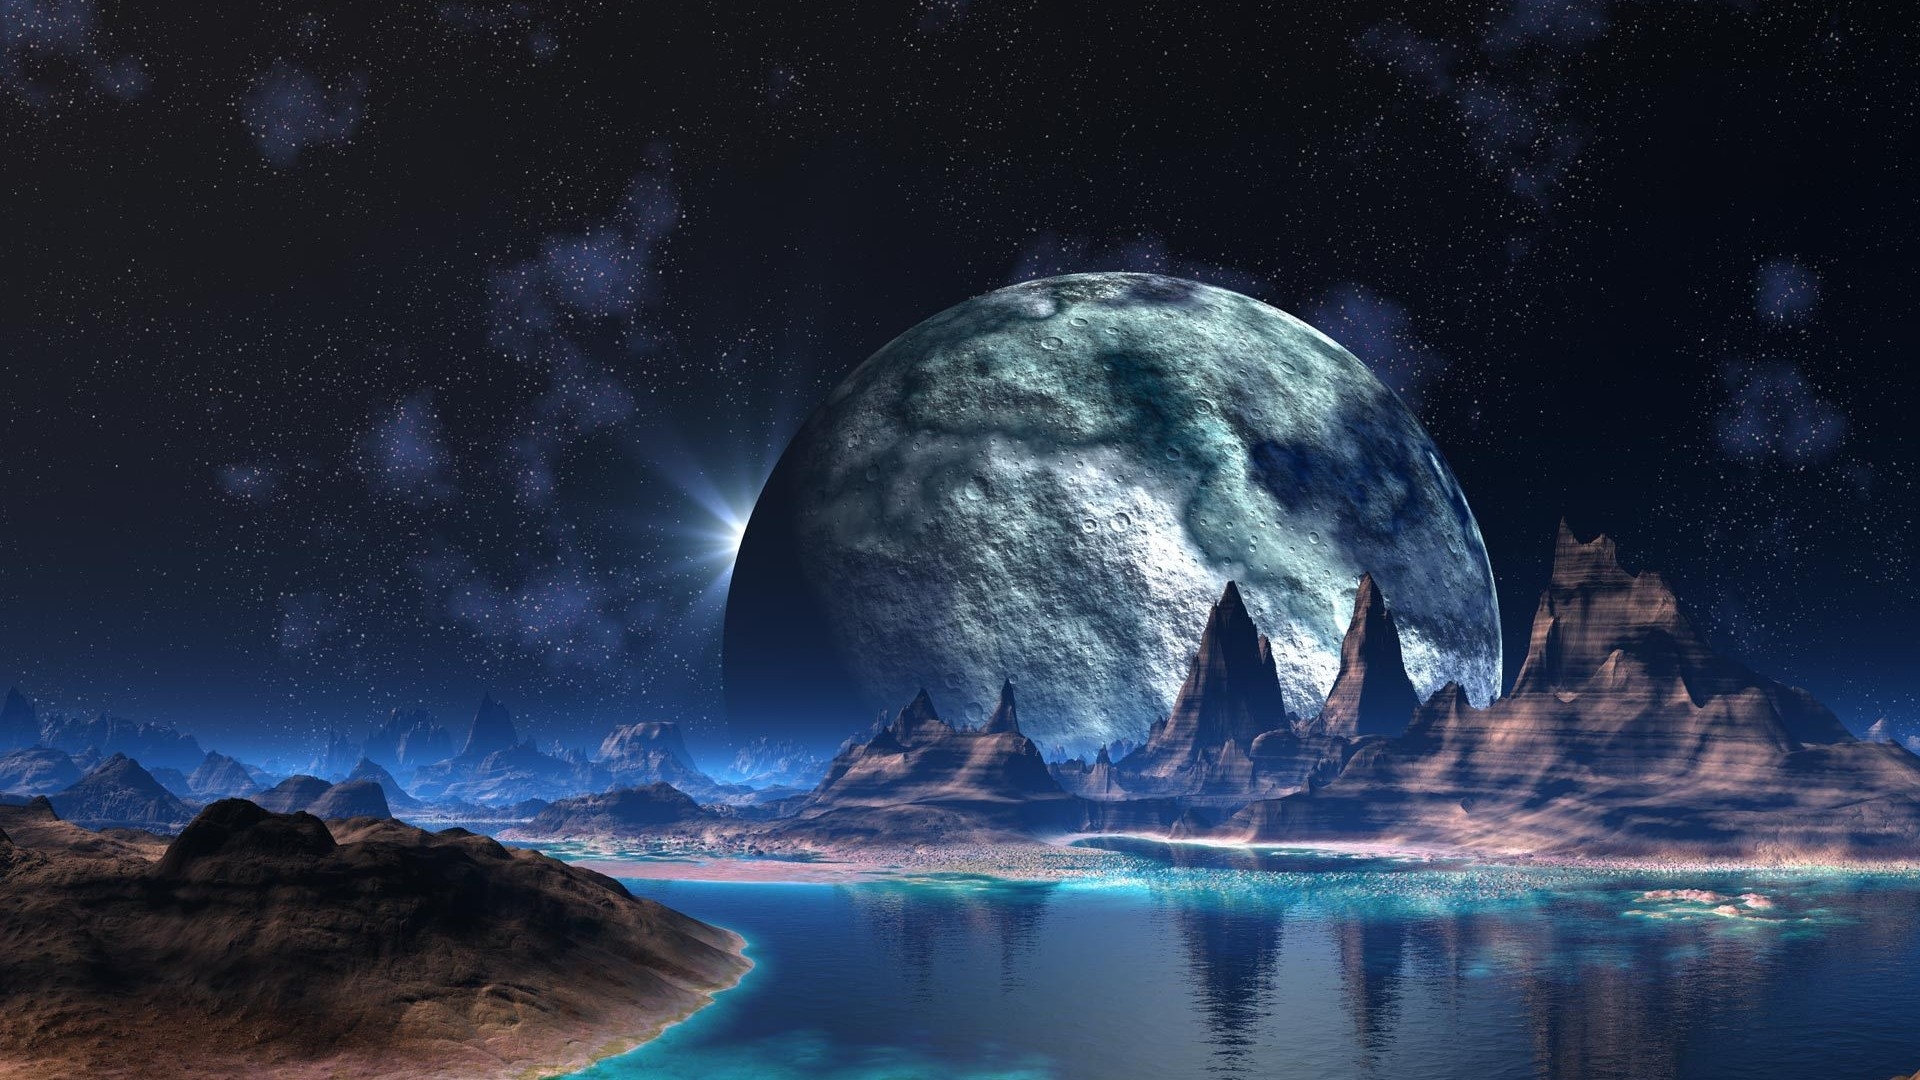 Space Fantasy Art Artwork World Alien World Stars Moon River Water Natural Light Mountains Without P 1920x1080